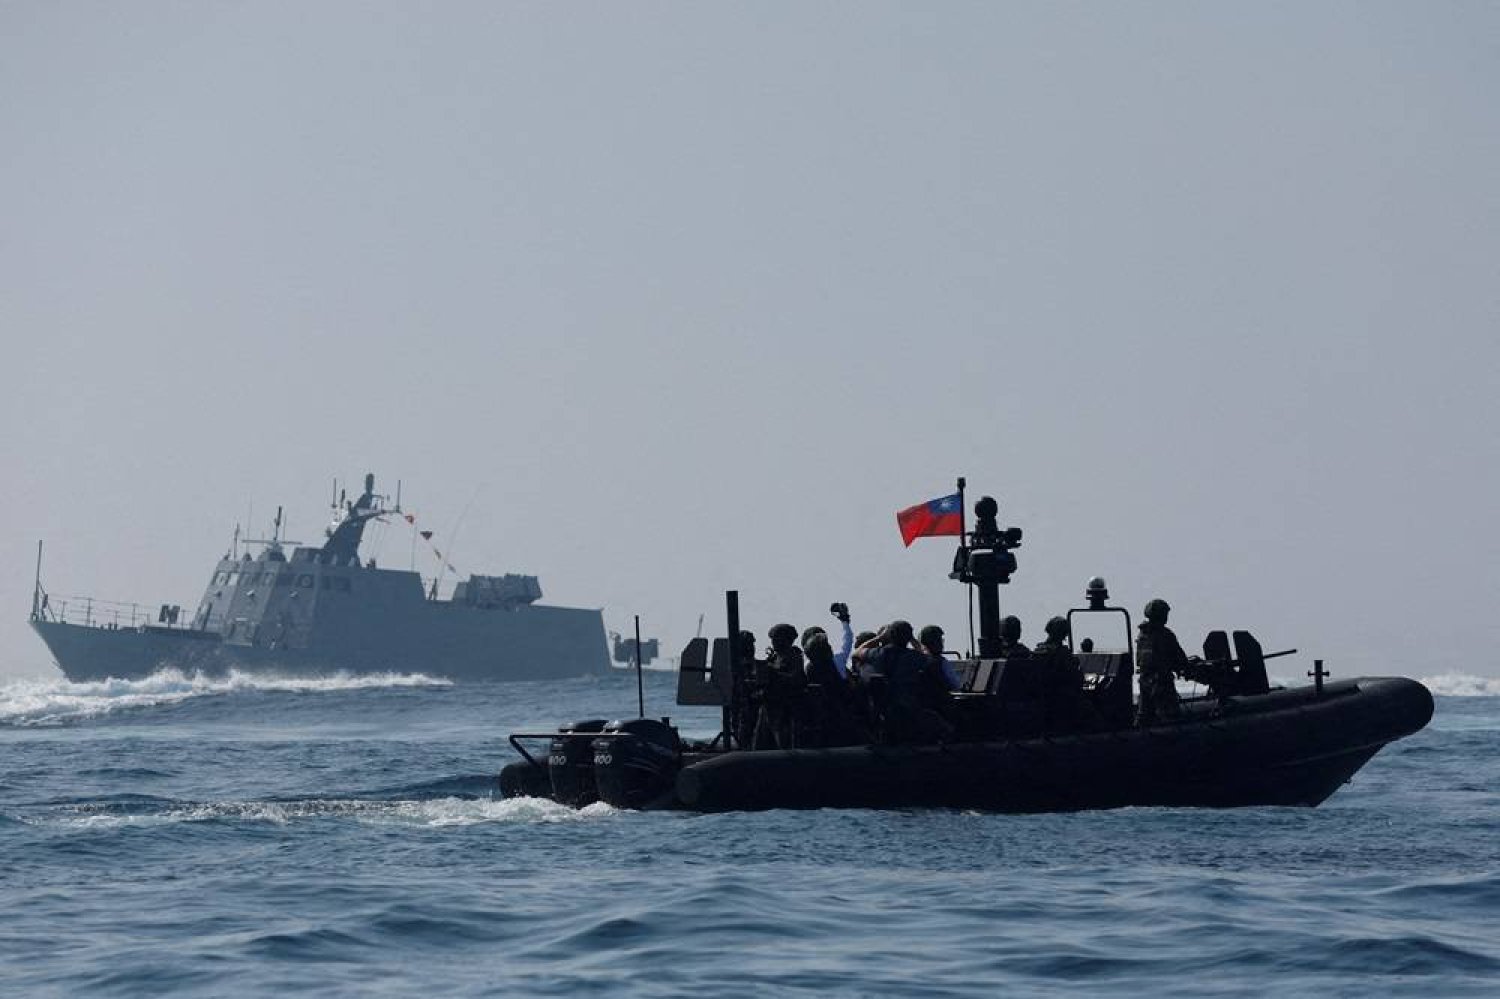  Members of Taiwan's Navy and media onboard a special operation boat navigate near a Kuang Hua VI-class missile boat, during a drill part of a demonstration for the media, to show combat readiness ahead of the Lunar New Year holidays, on the waters near a military base in Kaohsiung, Taiwan January 31, 2024. (Reuters)